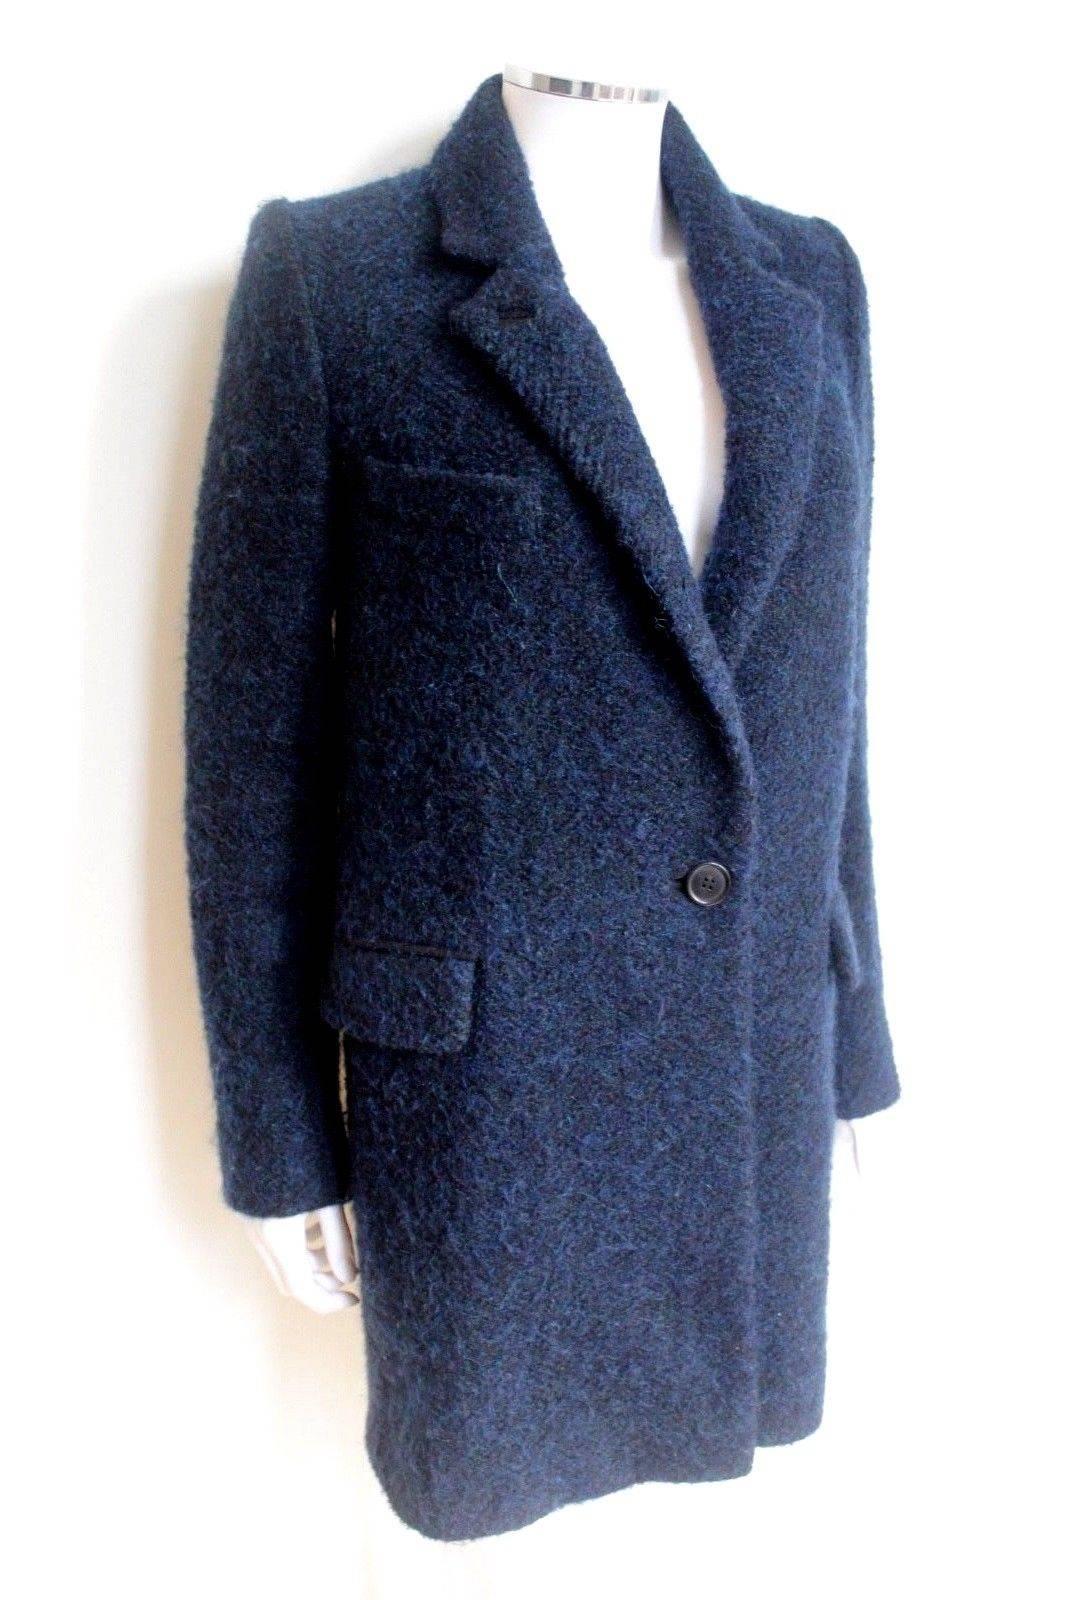 New Isabel Marant Etoile Daphne Navy Wool-Blend Coat F 34 uk 6
Navy wool, mohair, alpaca and cotton blend 'Daphne' coat from Isabel Marant Étoile featuring notched lapels, long sleeves, a chest pocket, a front button fastening, a herringbone pattern